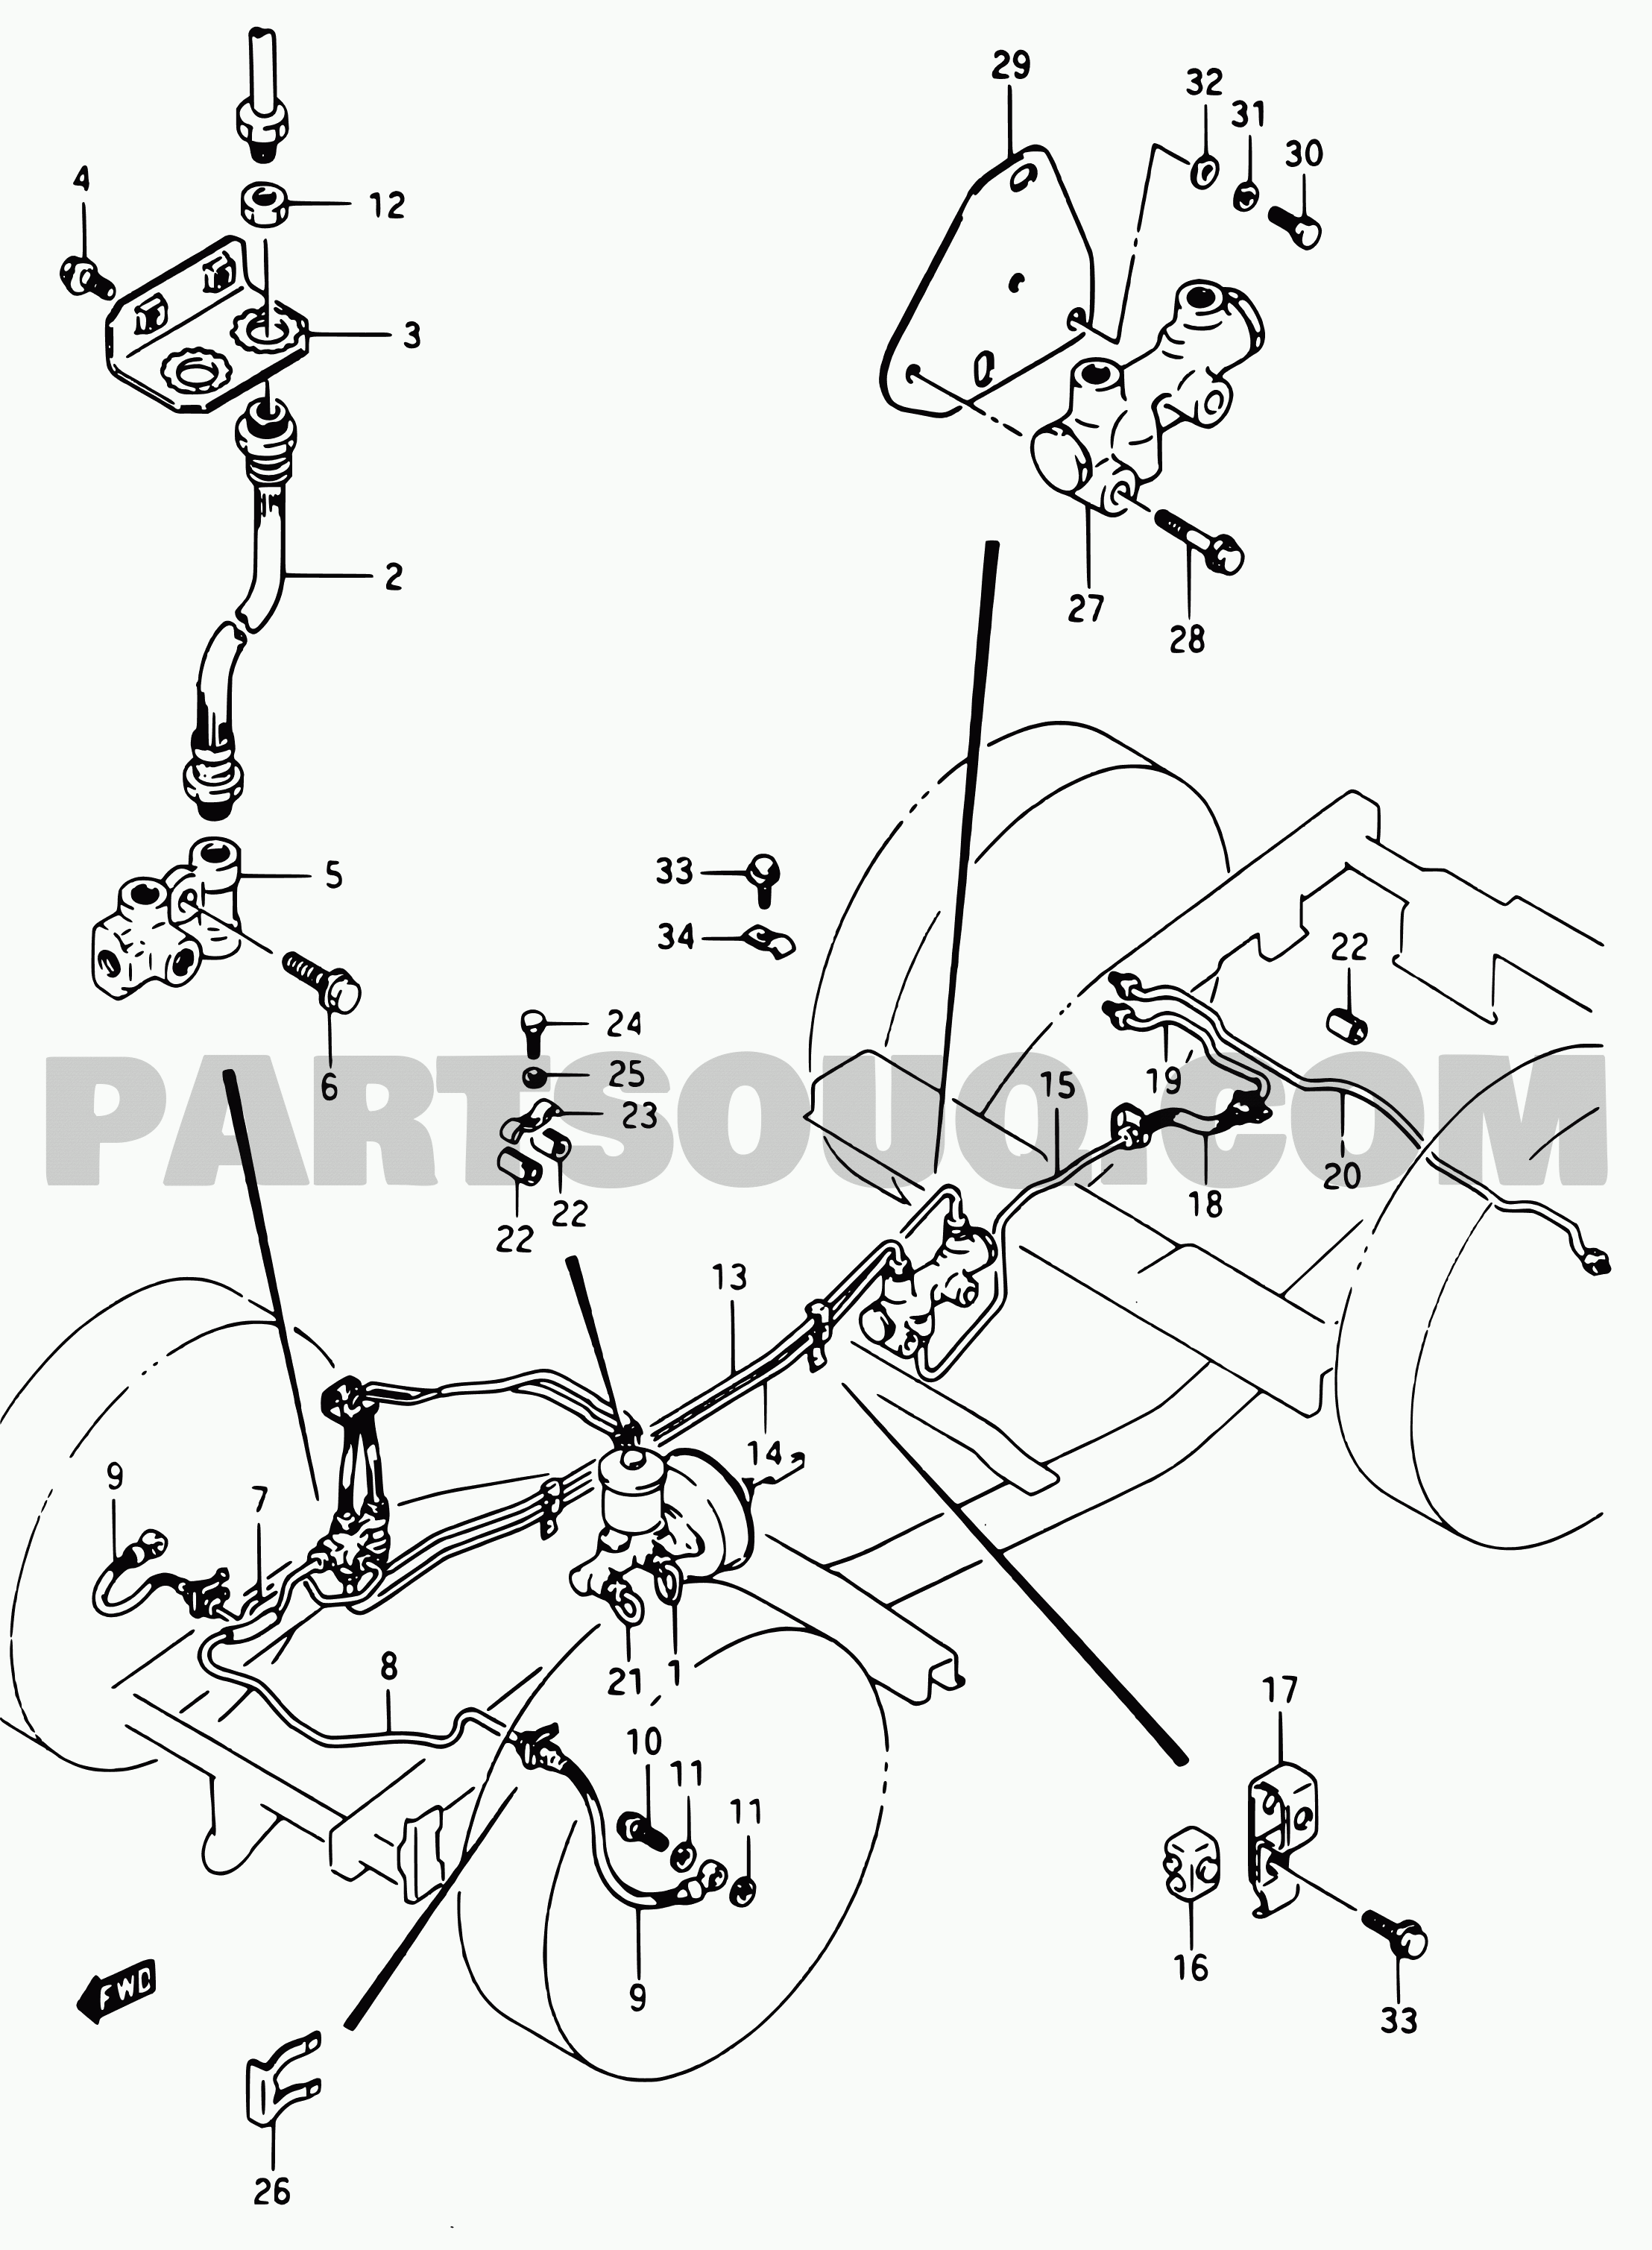 90 - BRAKE PIPING (W:SEE NOTE)